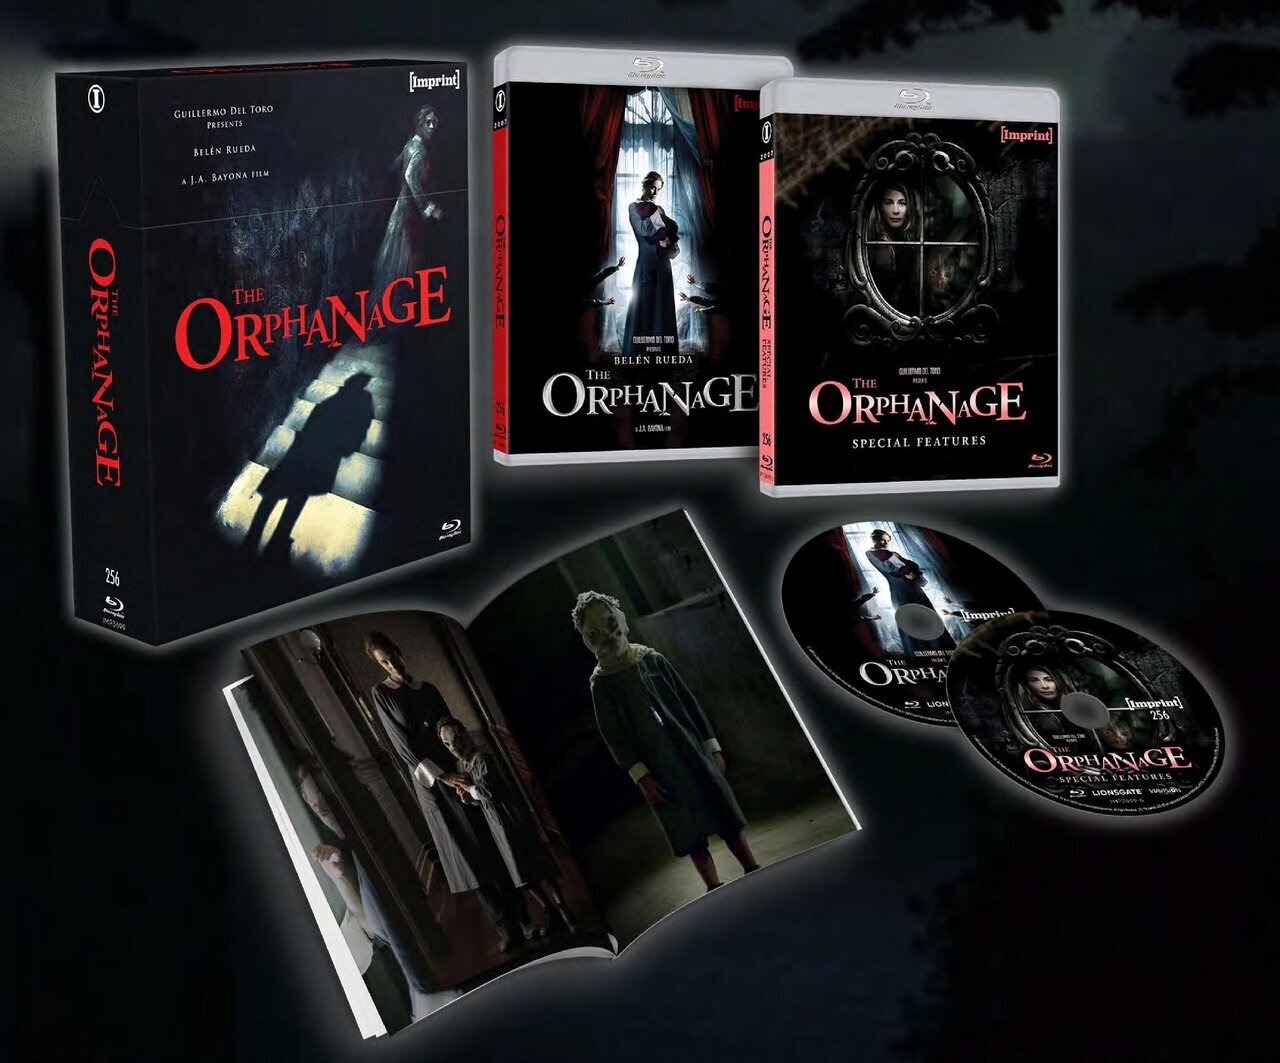 THE ORPHANAGE (REGION FREE IMPORT - LIMITED EDITION) BLU-RAY